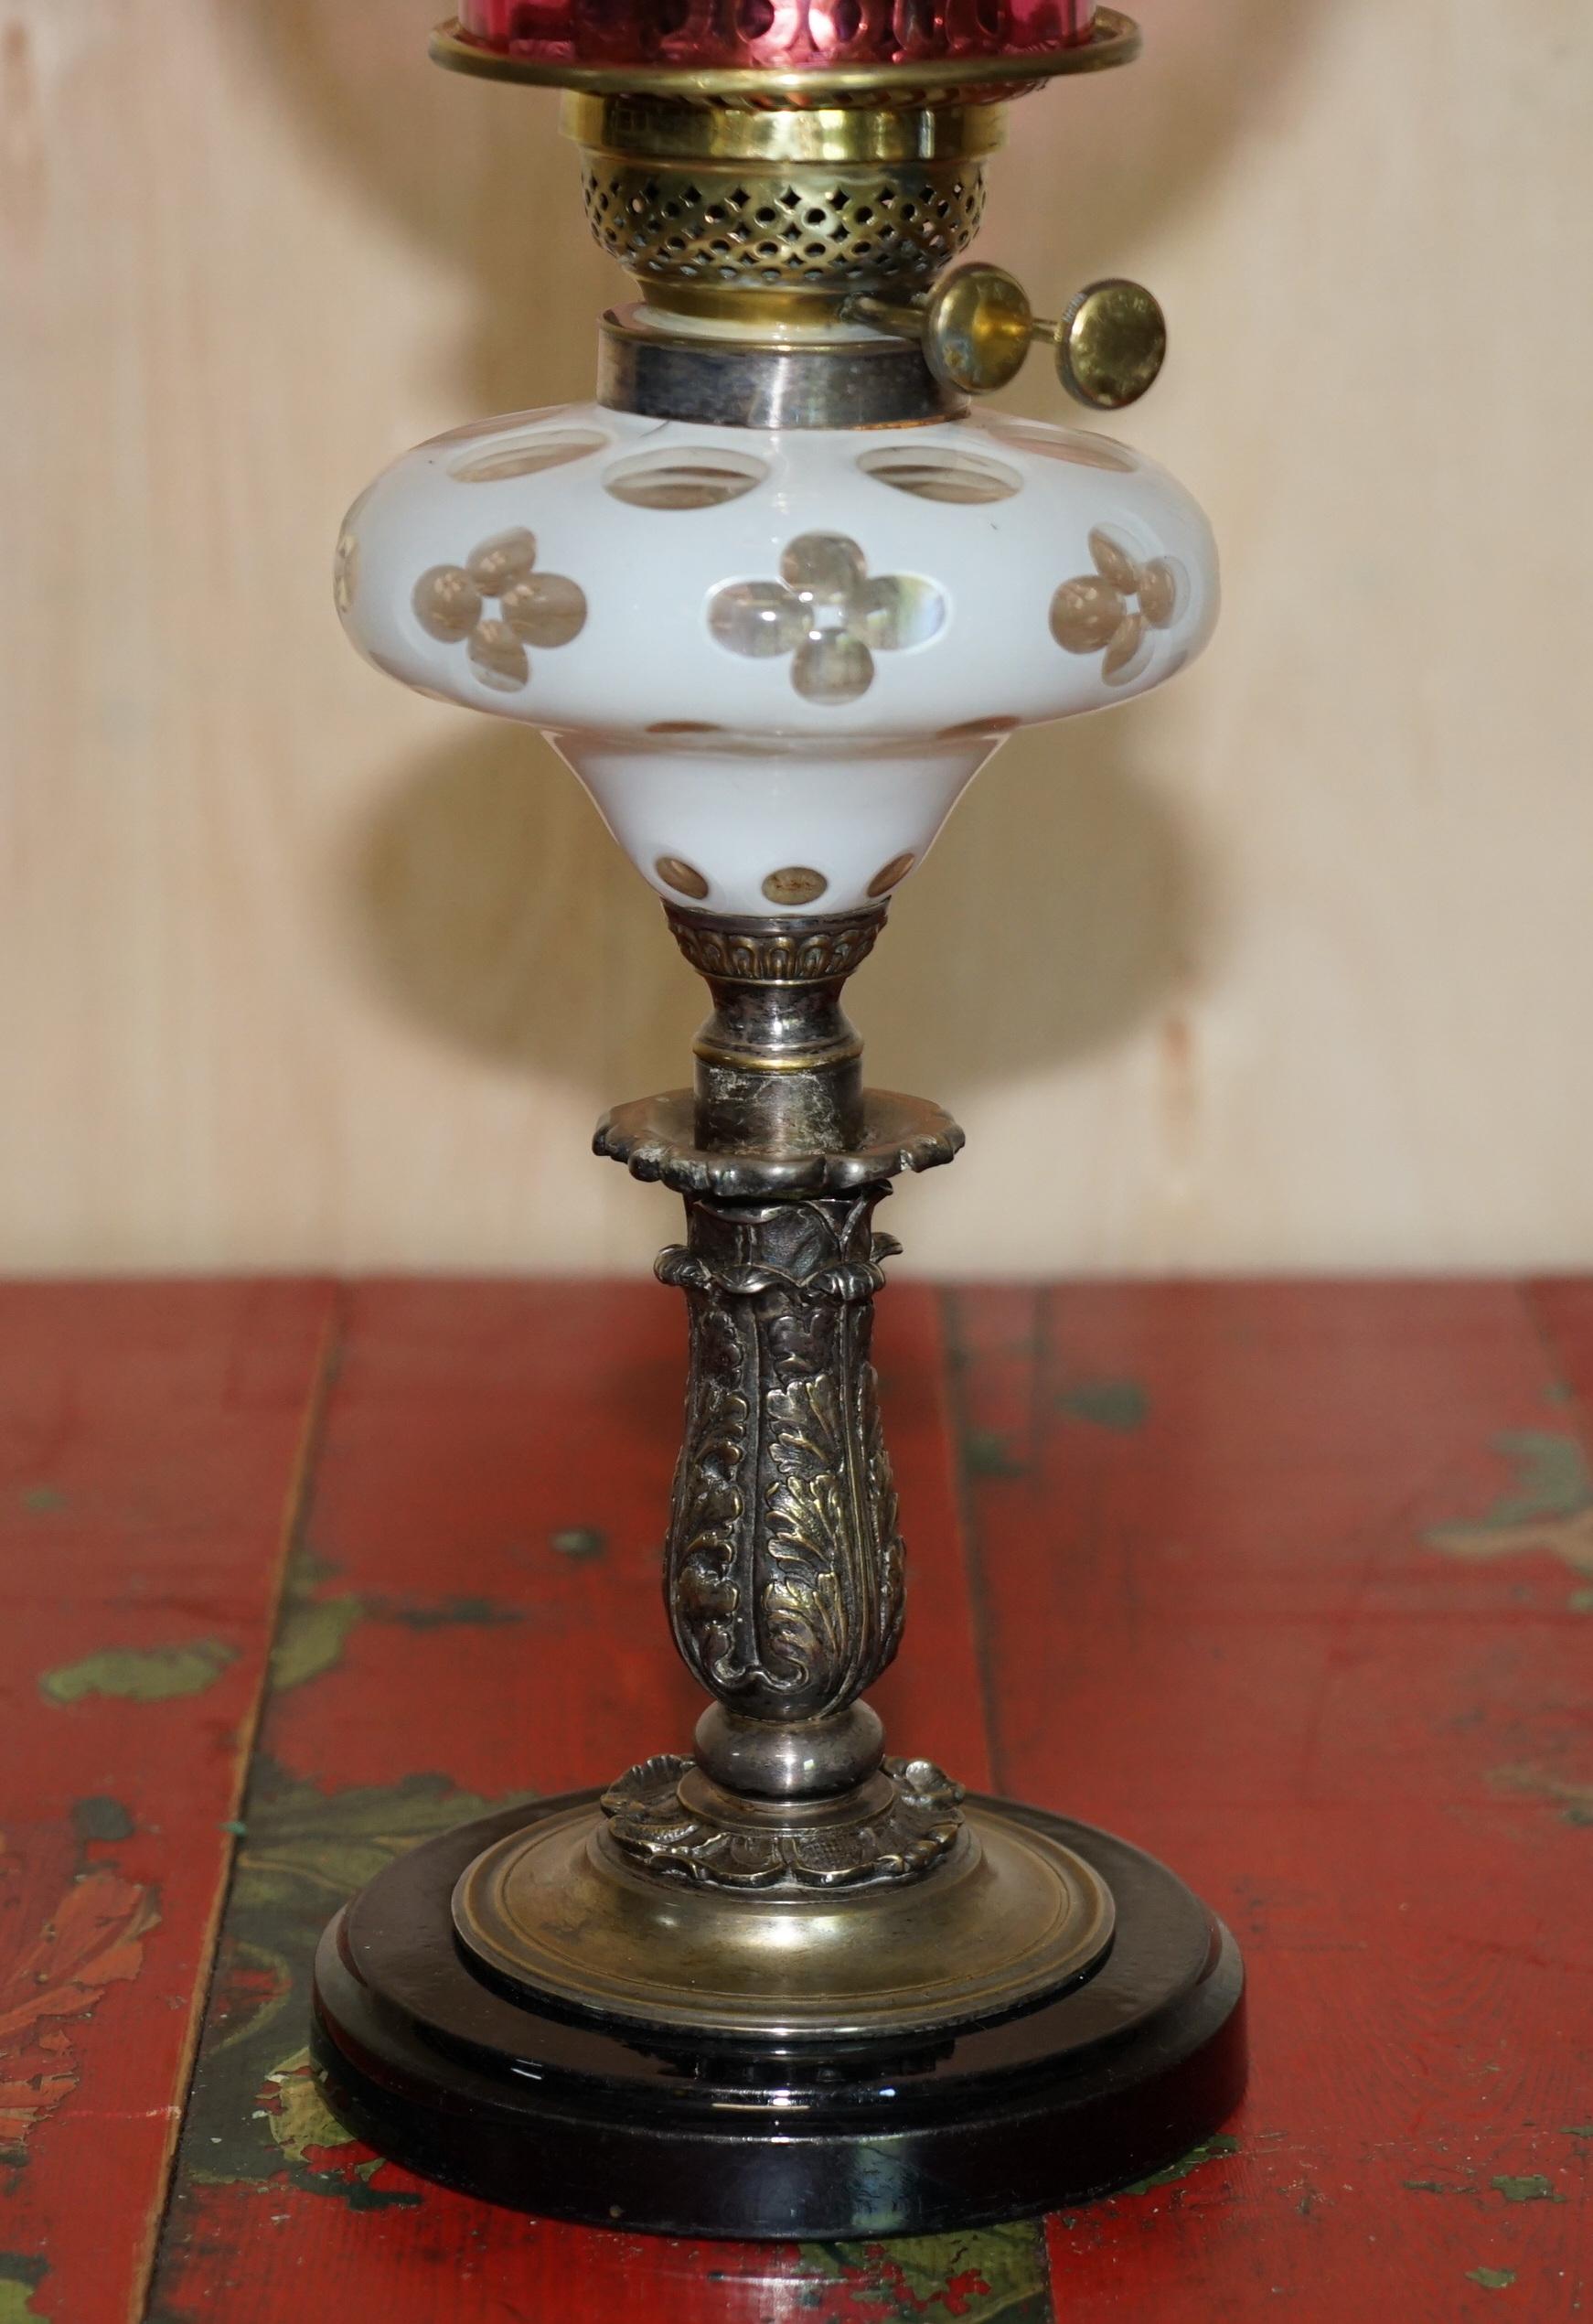 European Anitique Repousse Brass Victorian Oil Lamp Original Etched Glass & Ruby Shade